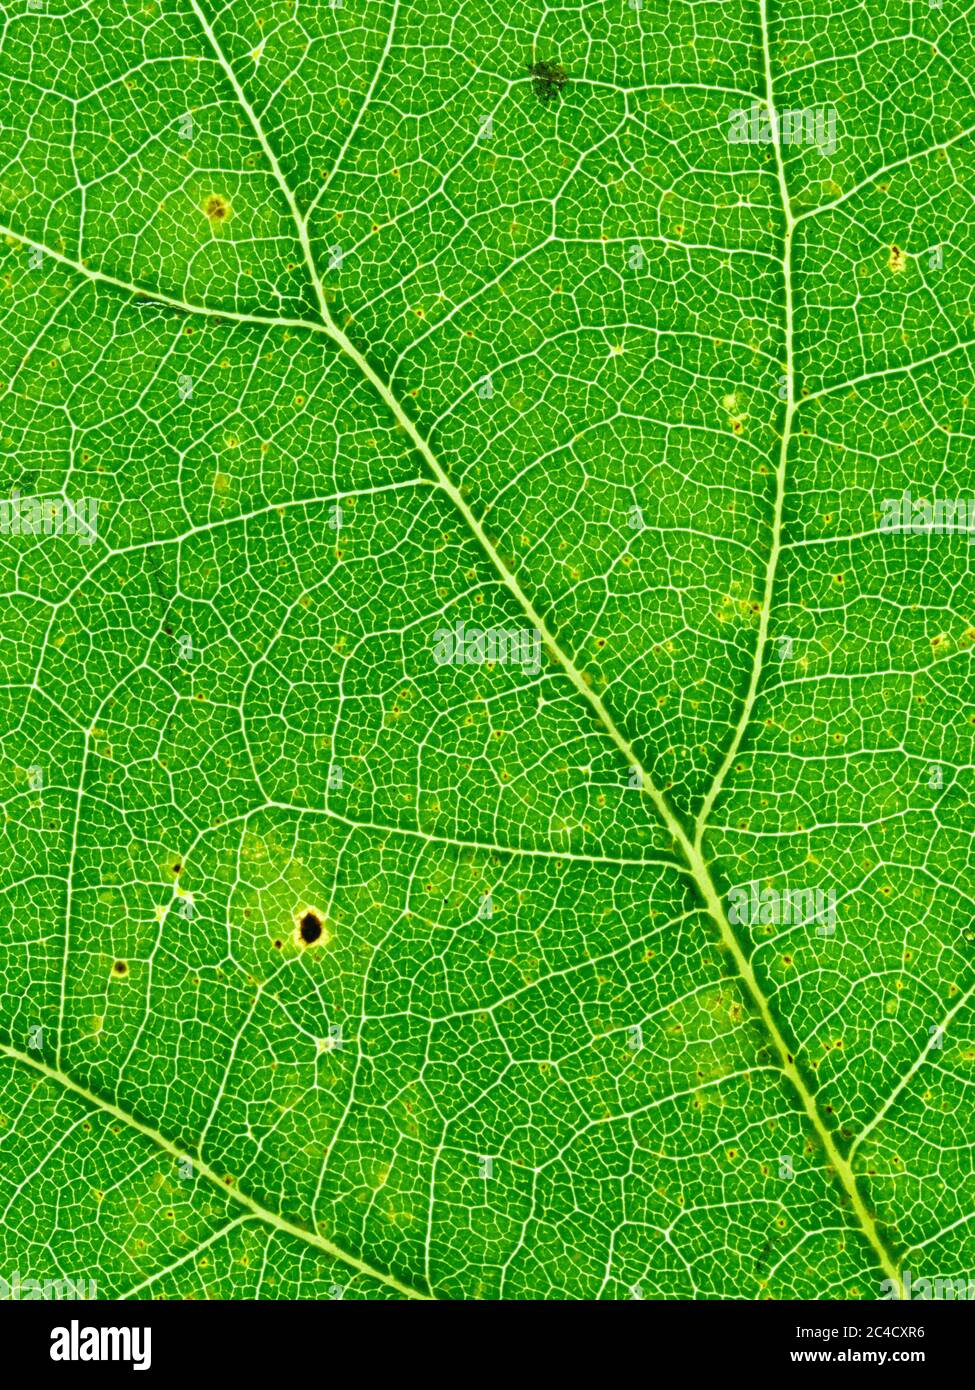 A close up of the details and patterns of the veins in an Oak leaf Stock Photo